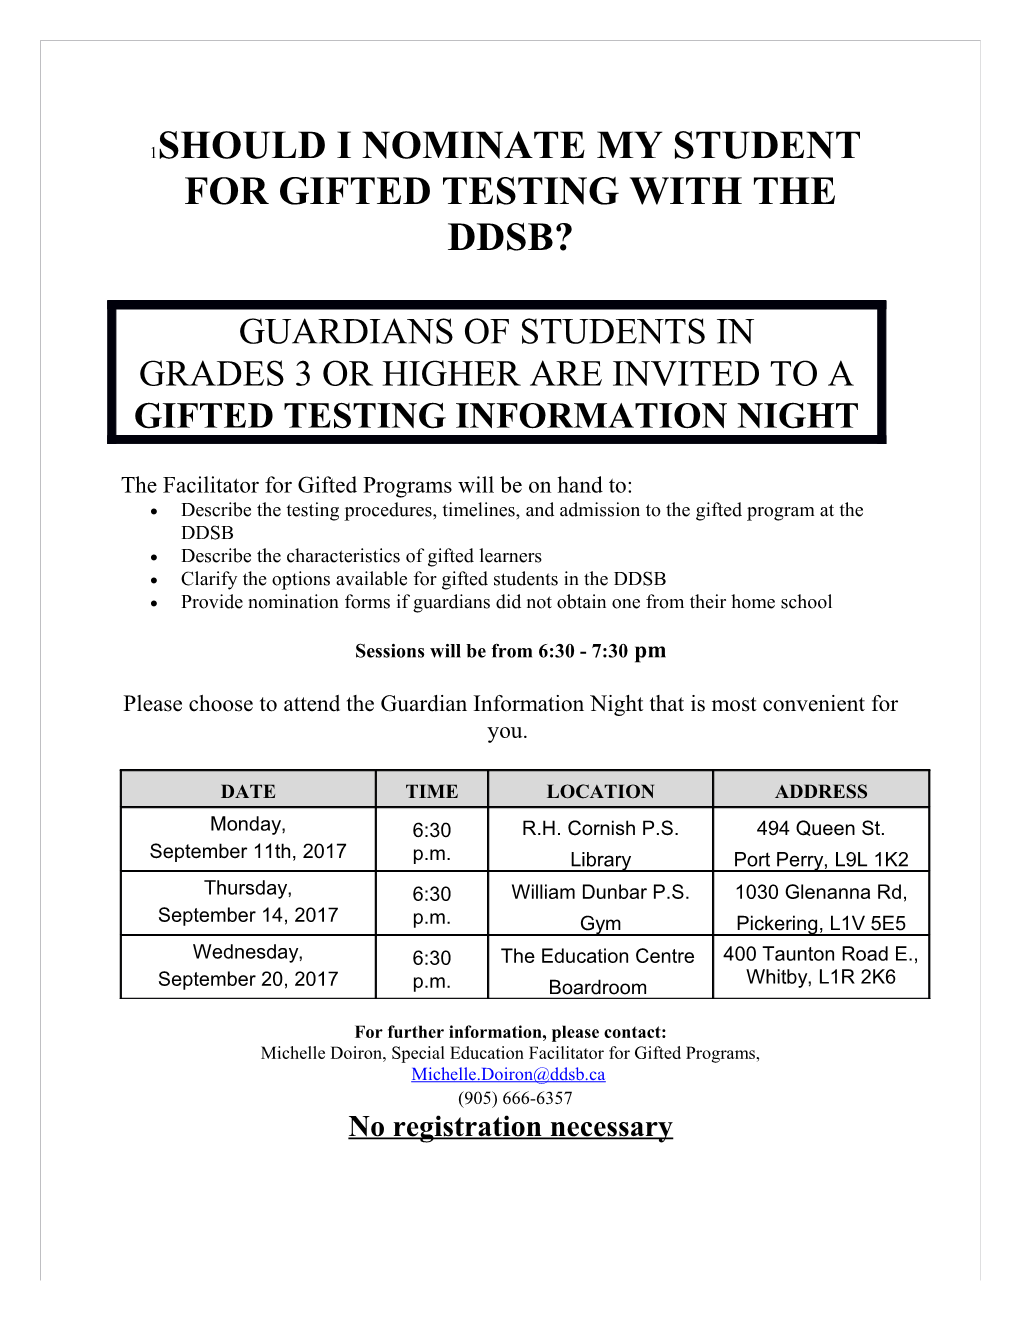 For Gifted Testing with the Ddsb?